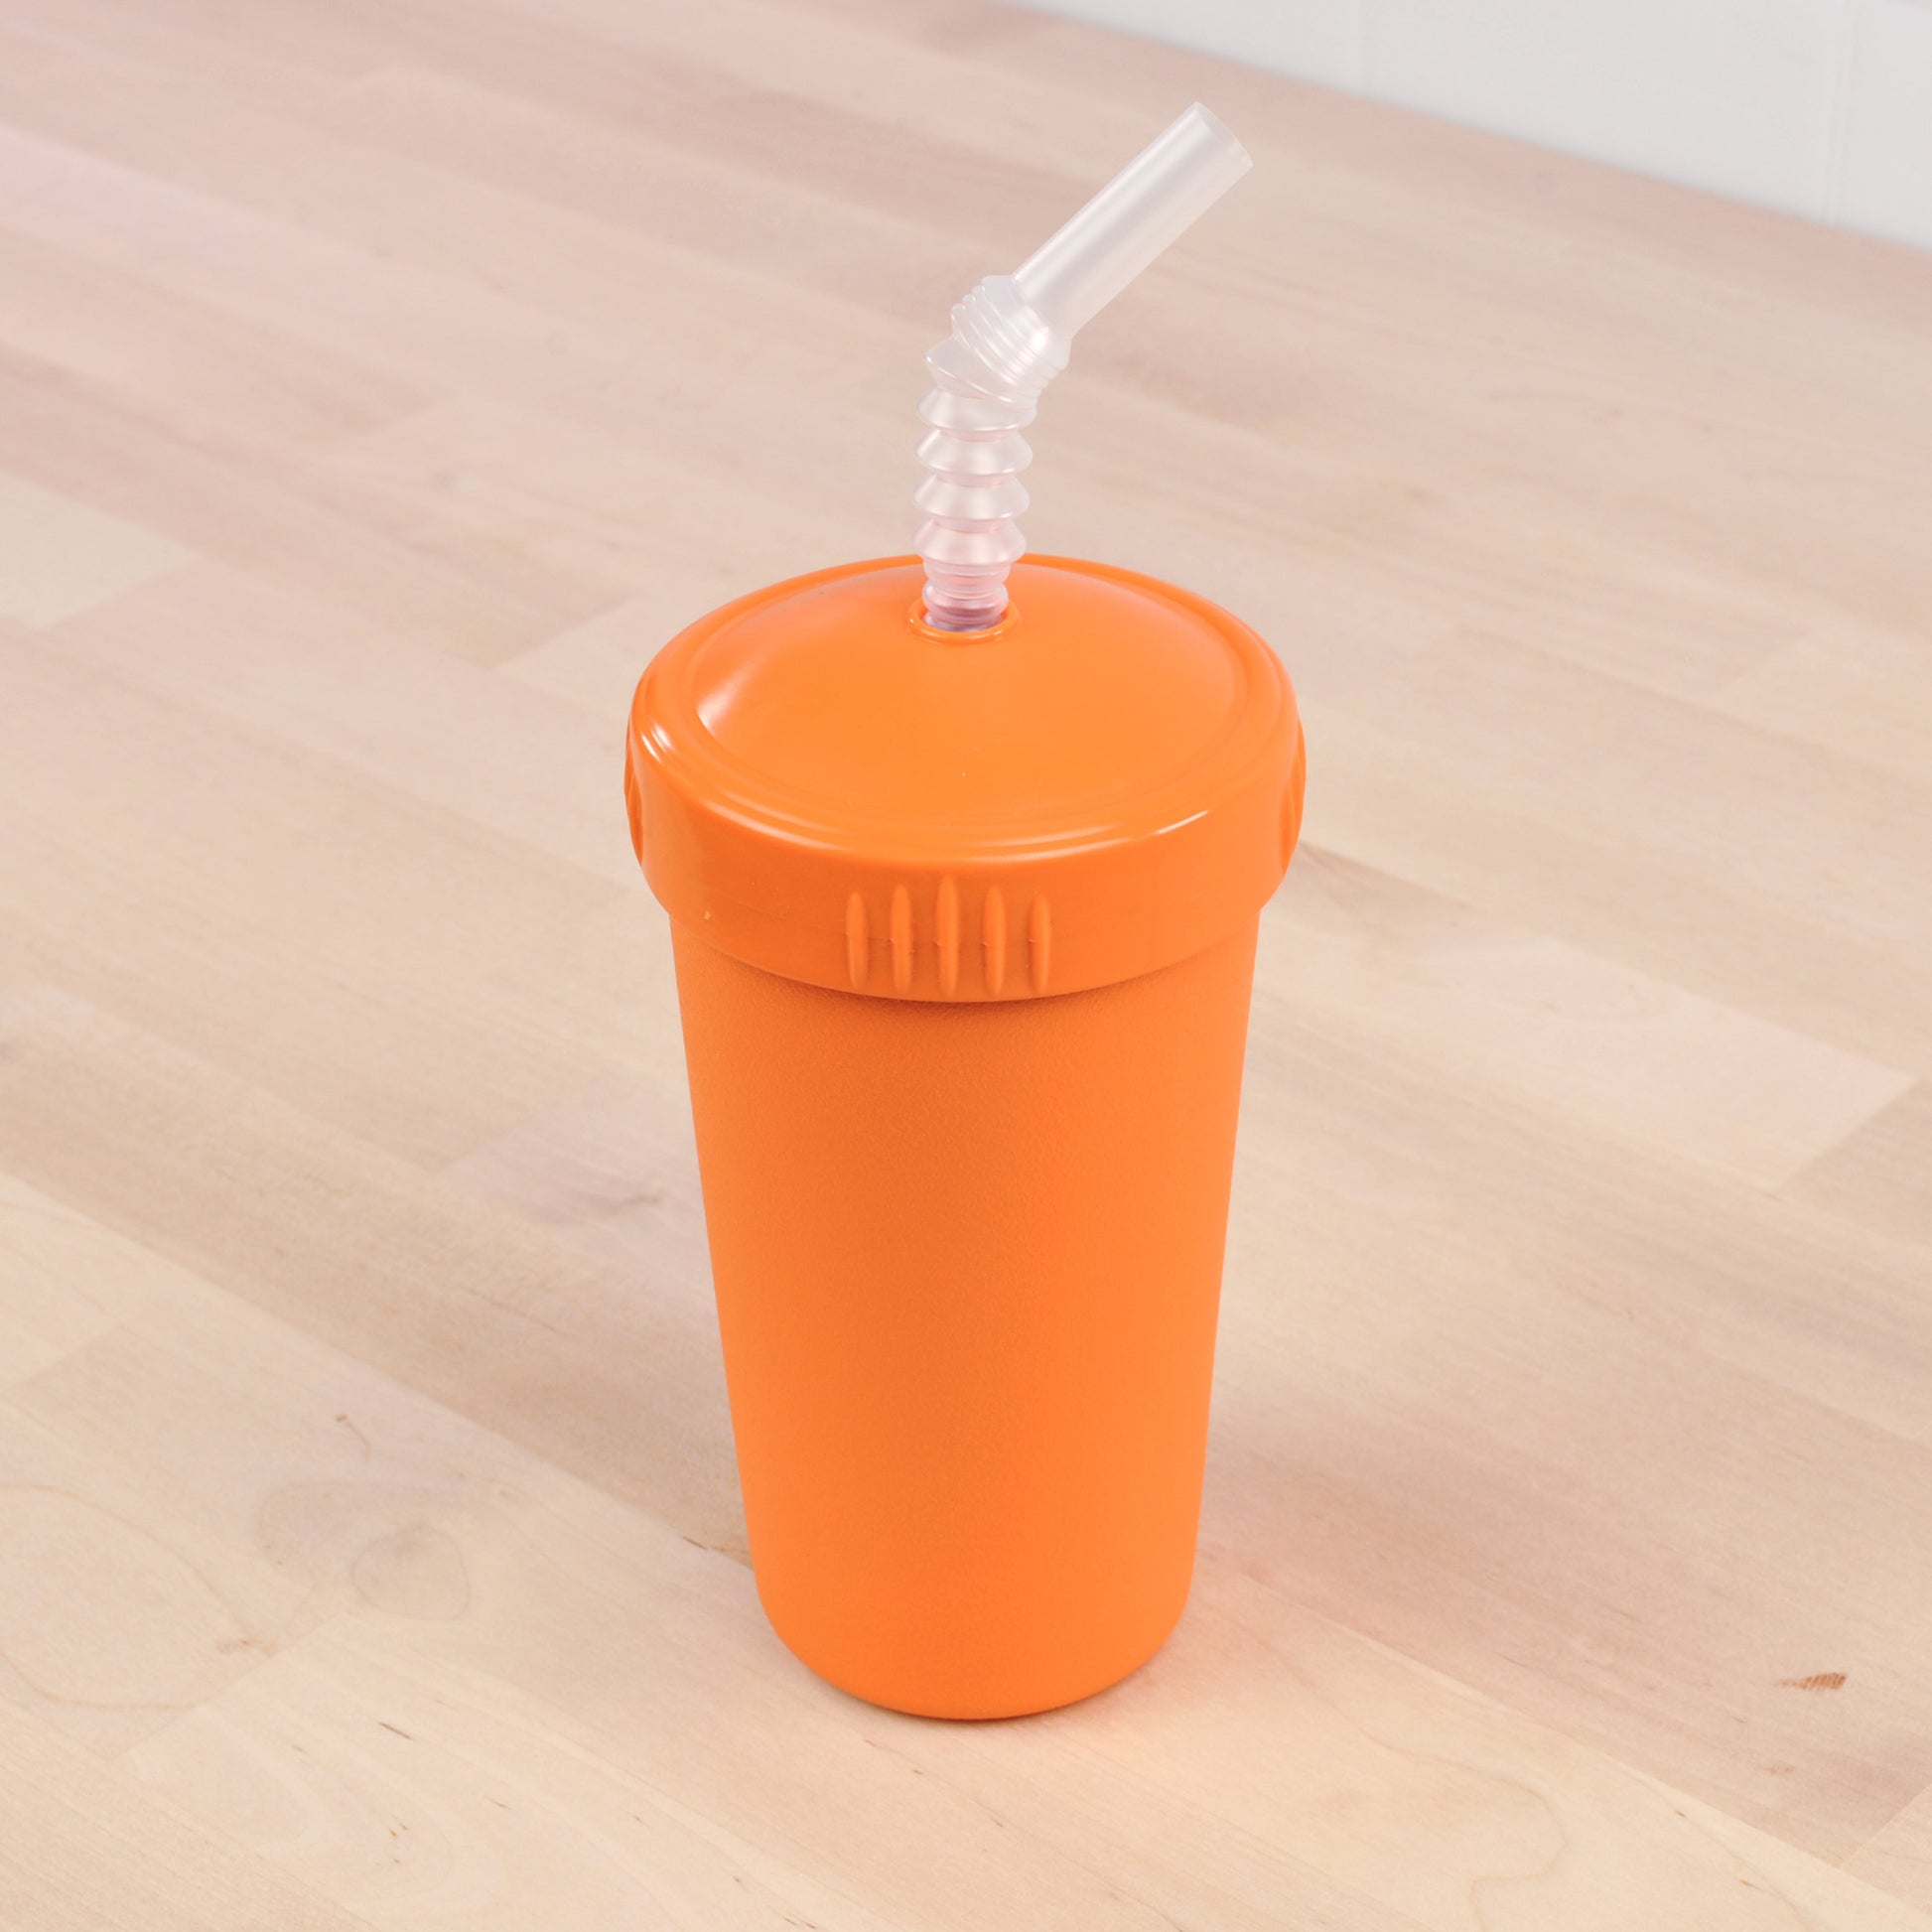 Re-Play Straw Cup in Orange from Bear & Moo